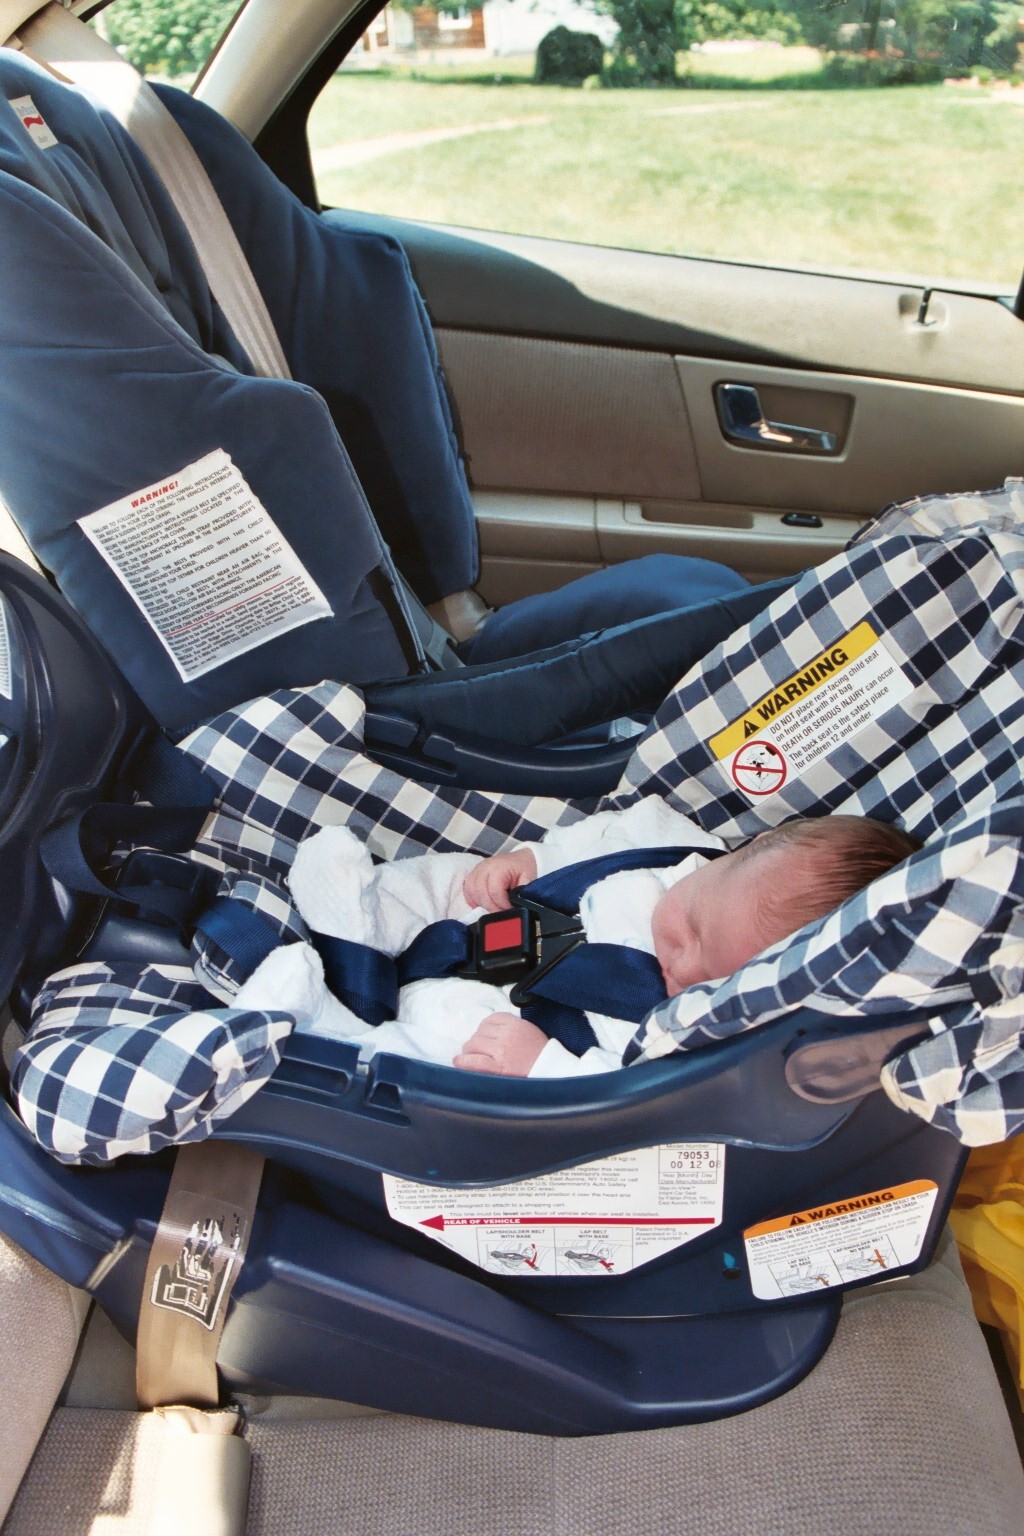 CarseatBlog: The Most Trusted Source for Car Seat Reviews 